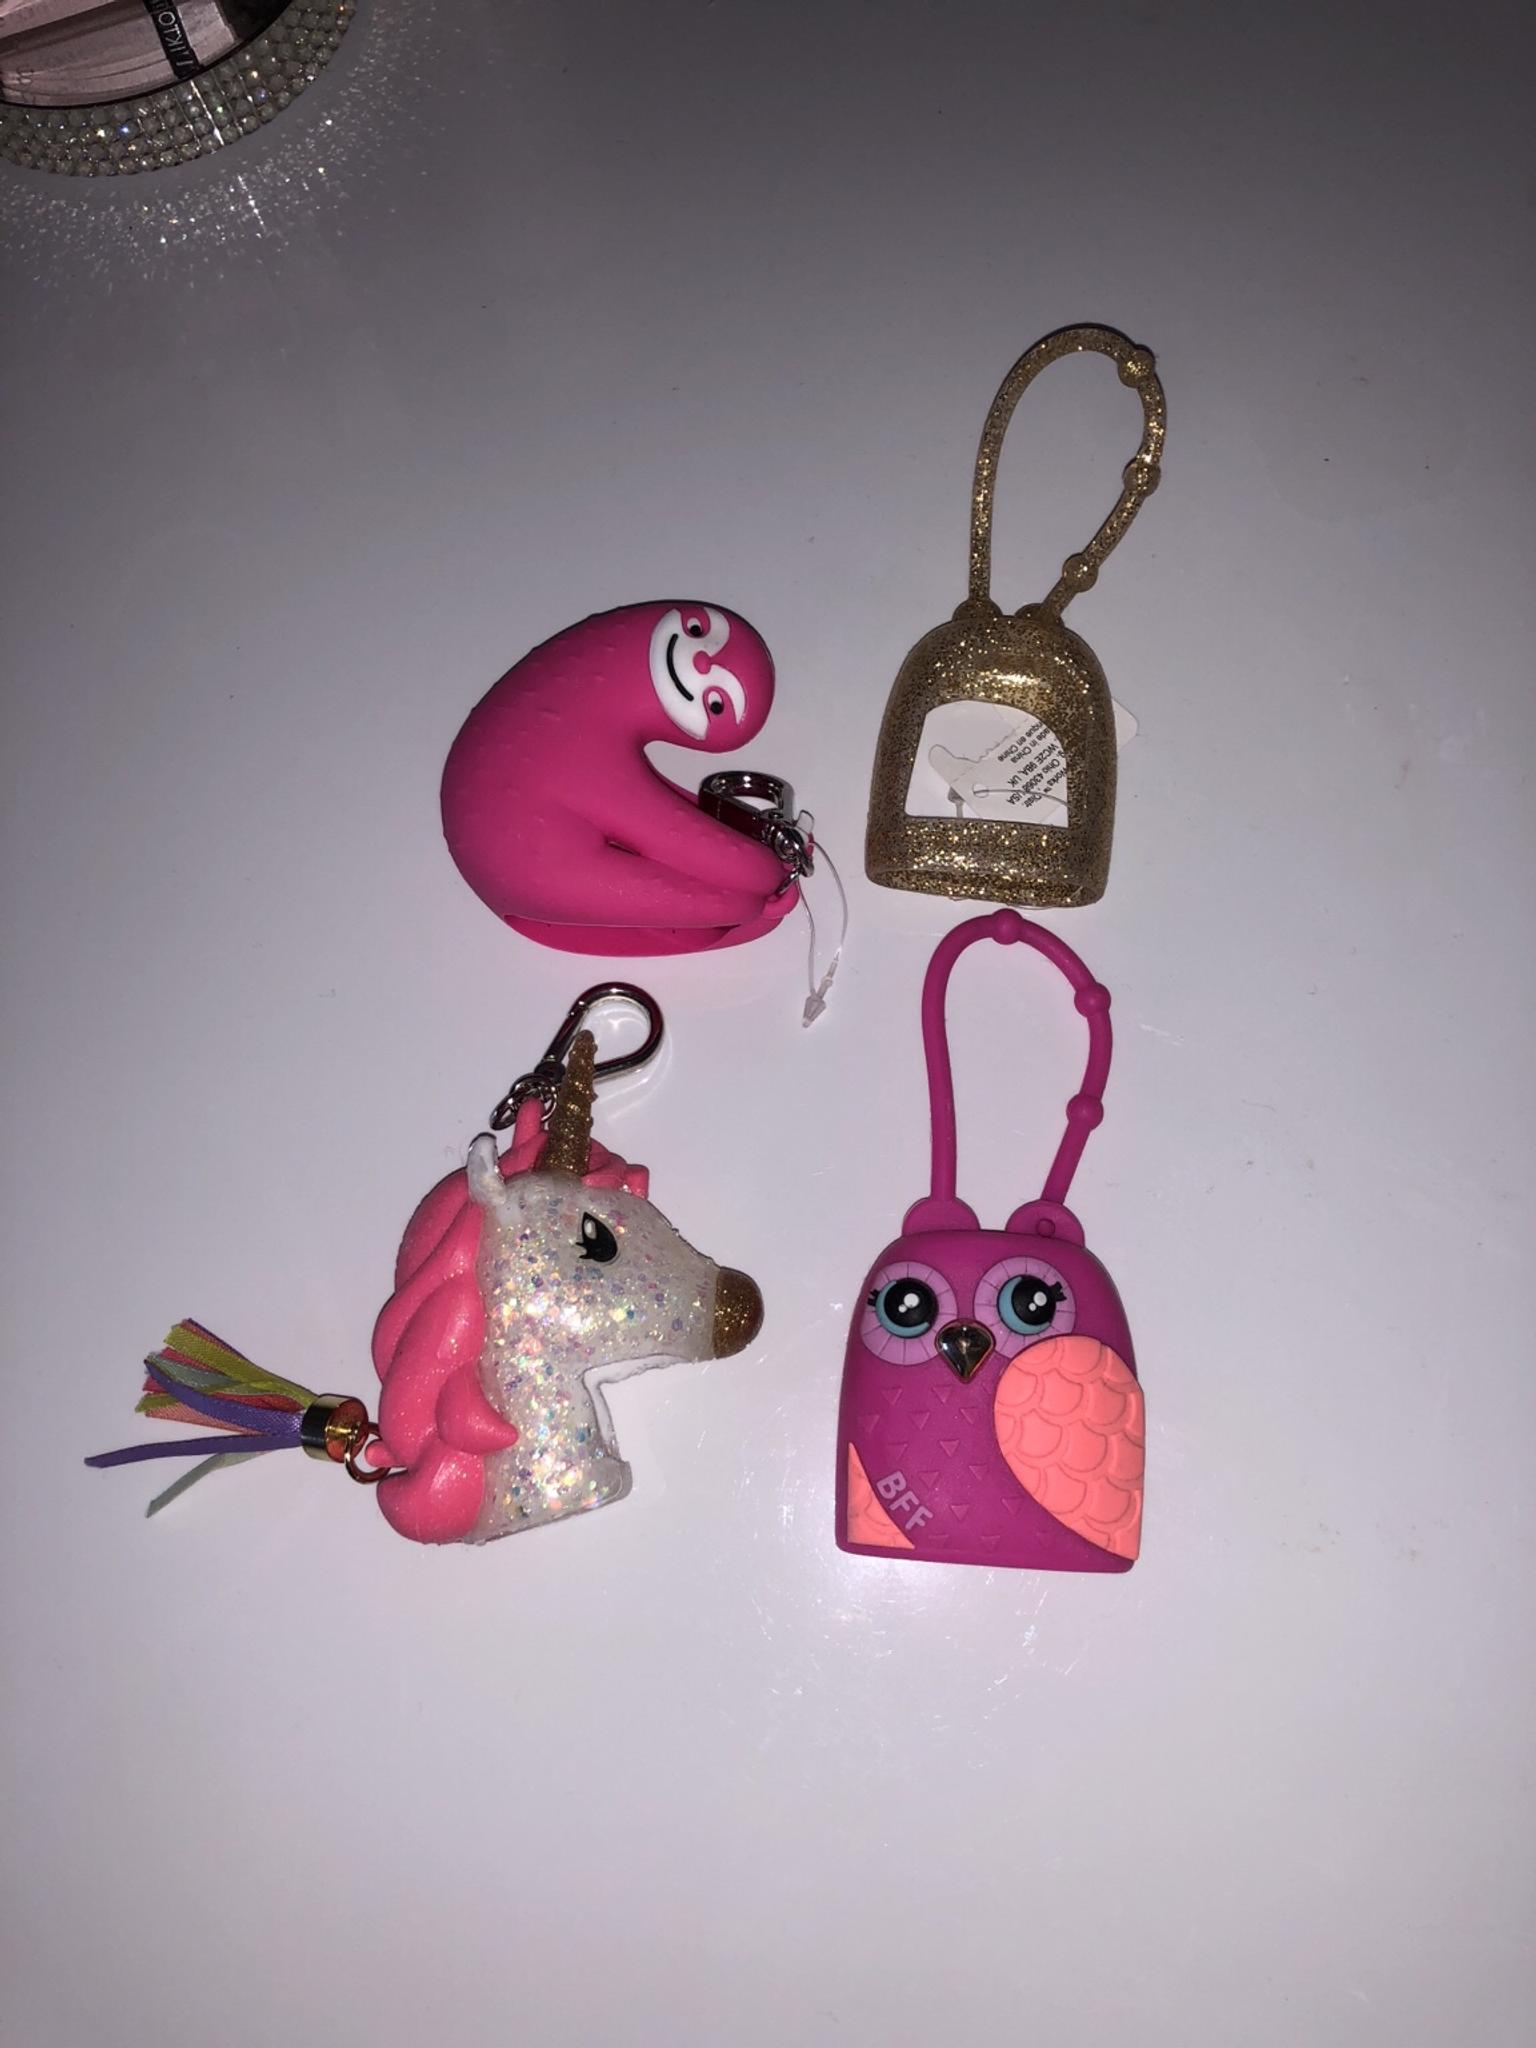 4 Bath And Body Works Hand Sanitizer Holders In Inverugie